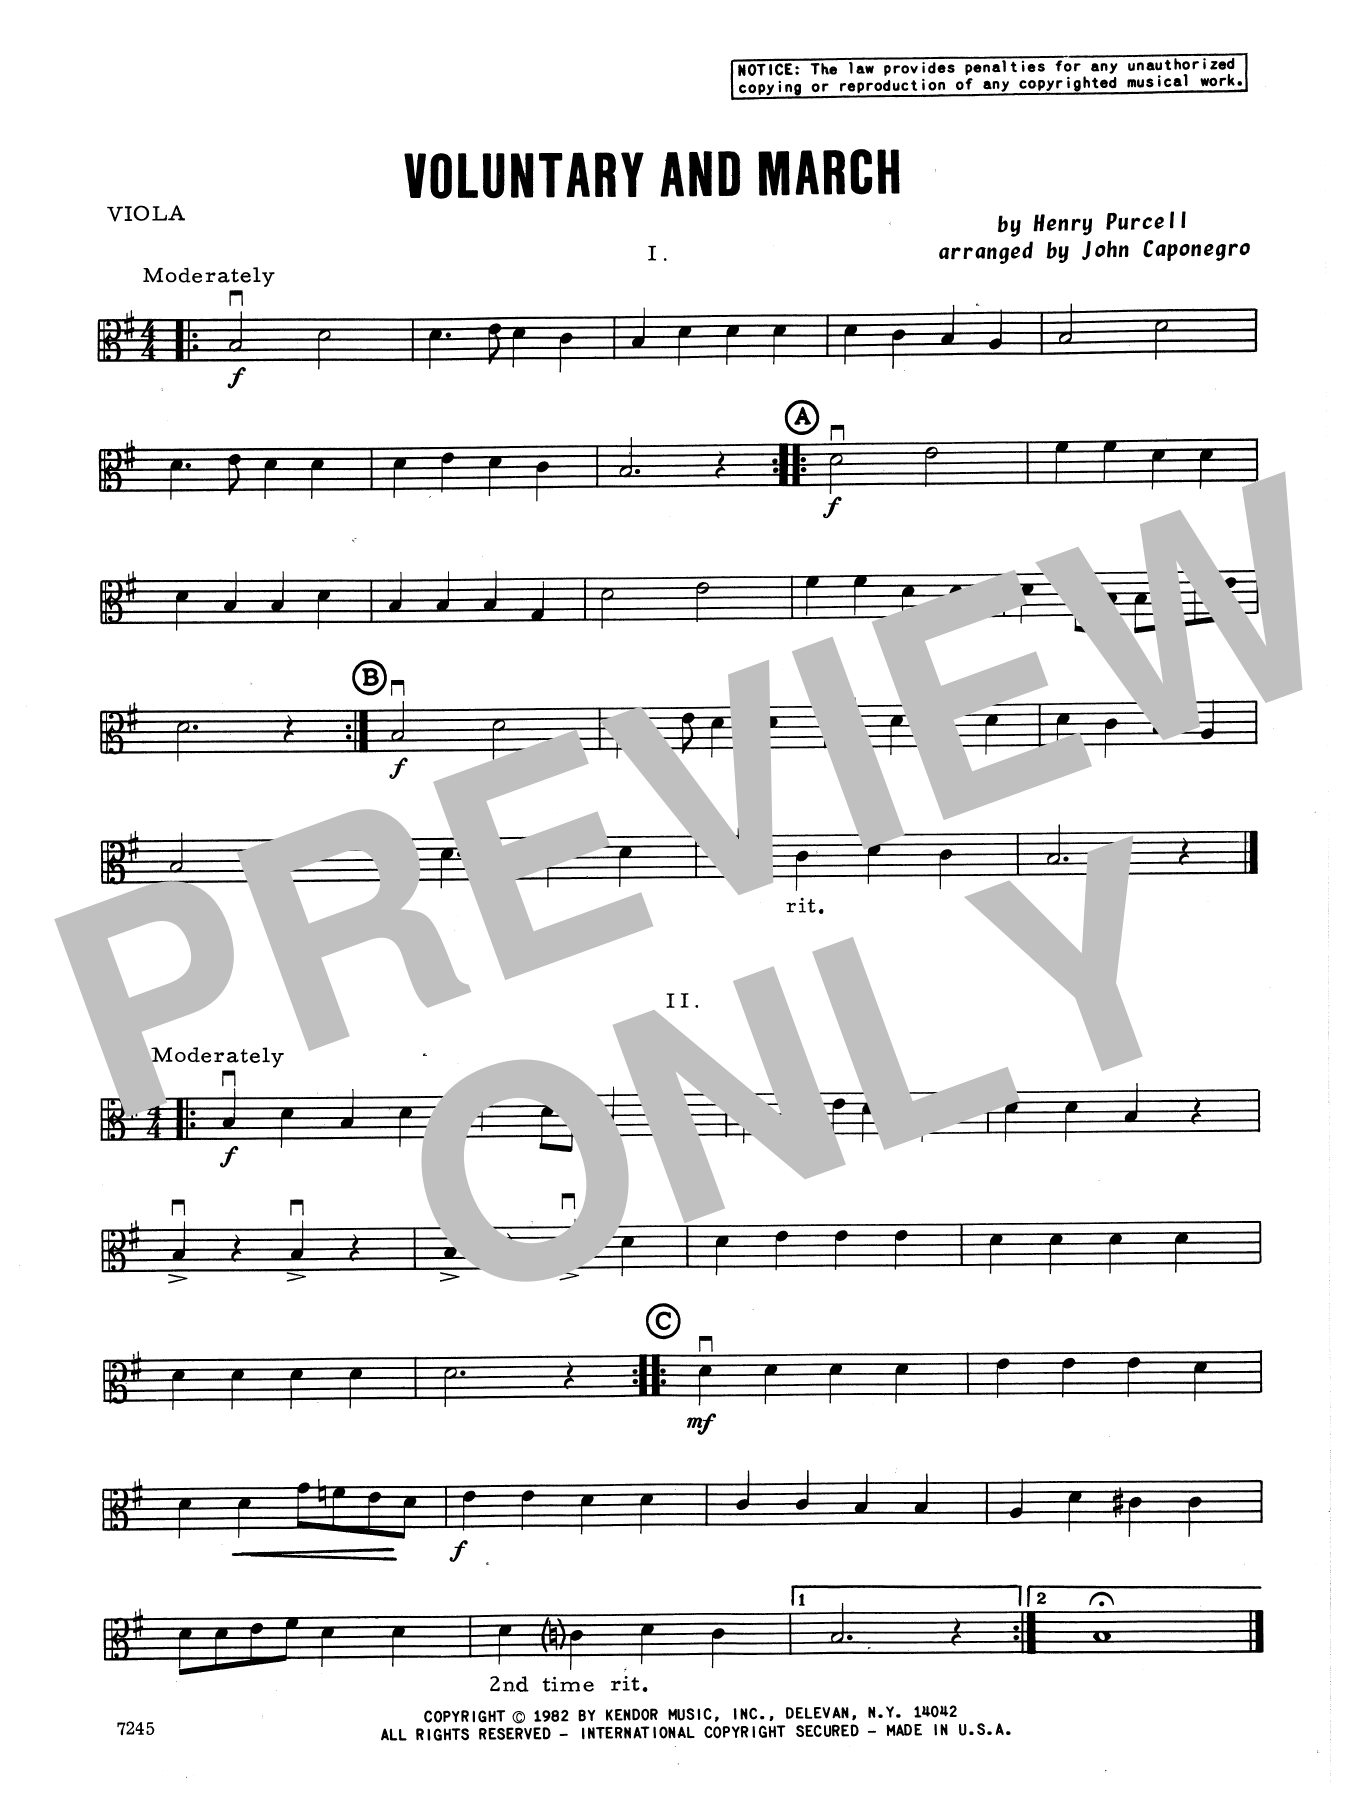 Download John Caponegro Voluntary and March - Viola Sheet Music